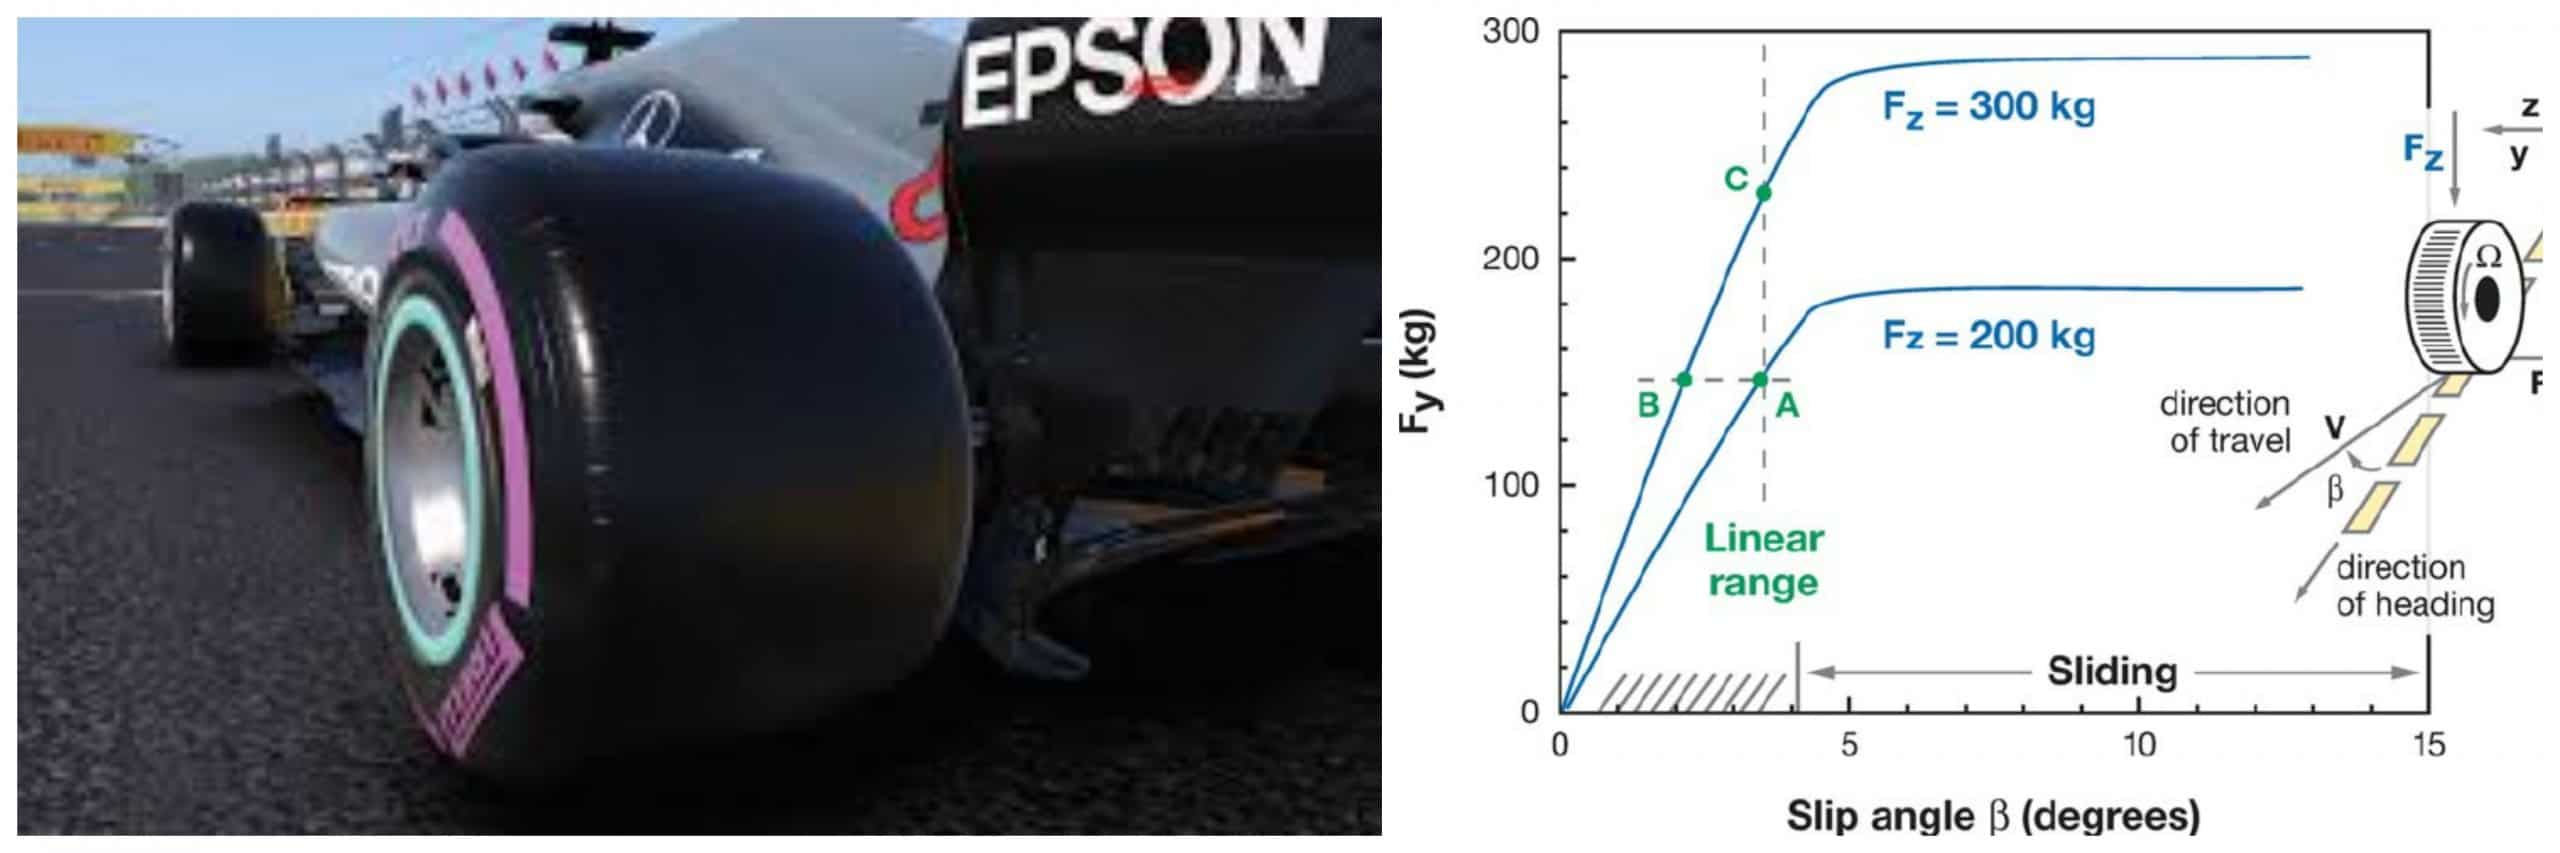 Why slip angle and slip ratio are important for a car | F1